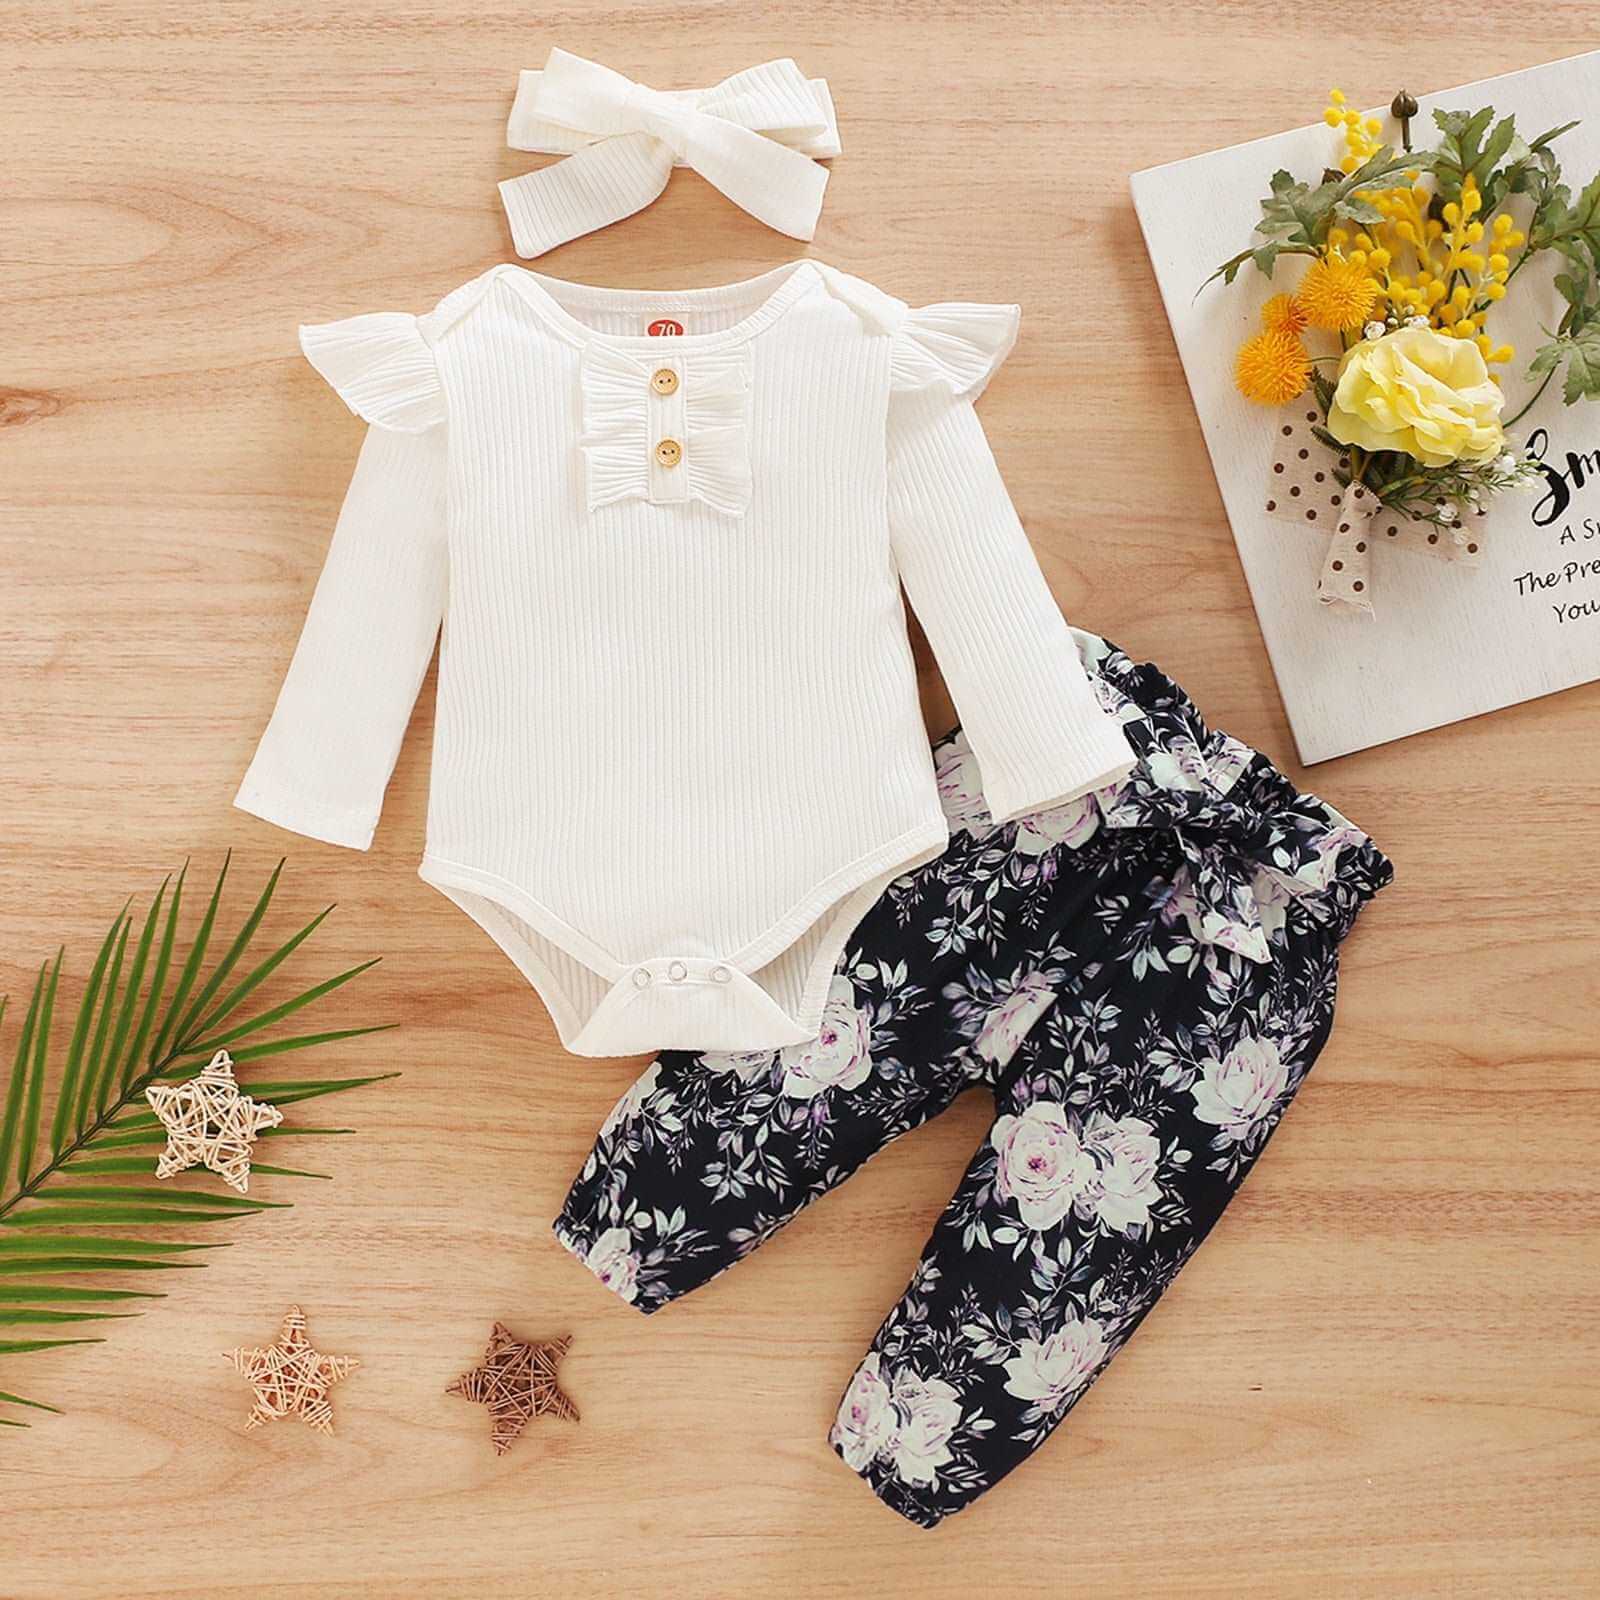 A formal baby girl outfit set from OleOle, consisting of three pieces of cloth, suitable for ages one to two years.